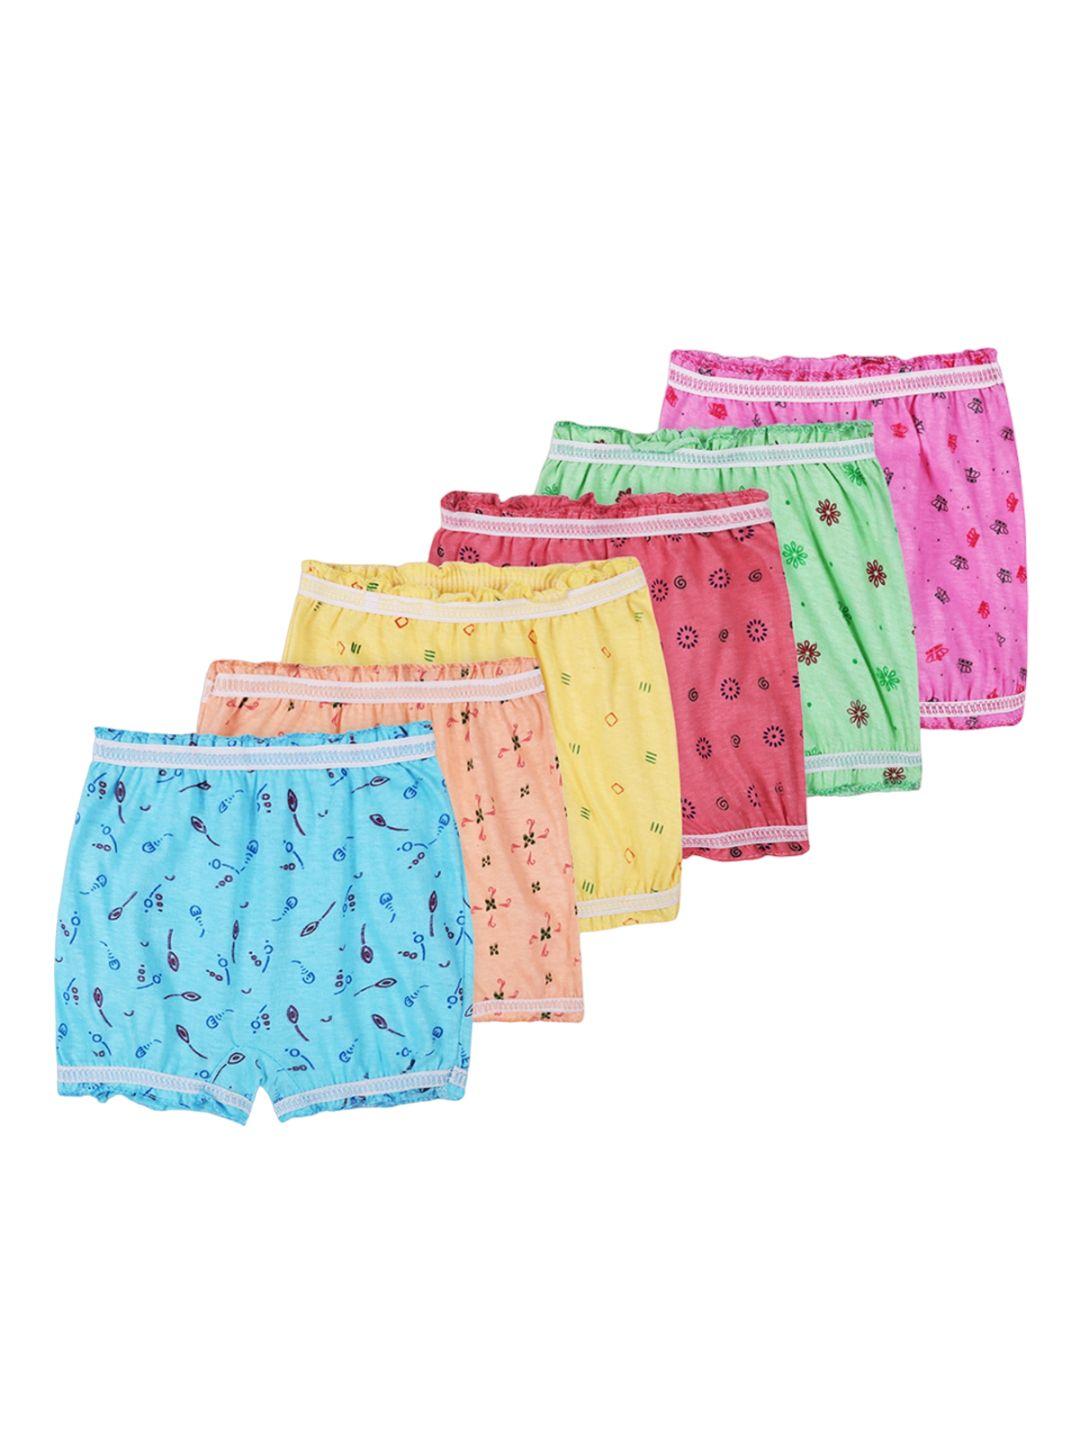 baesd kids pack of 6 printed pure cotton boy short briefs